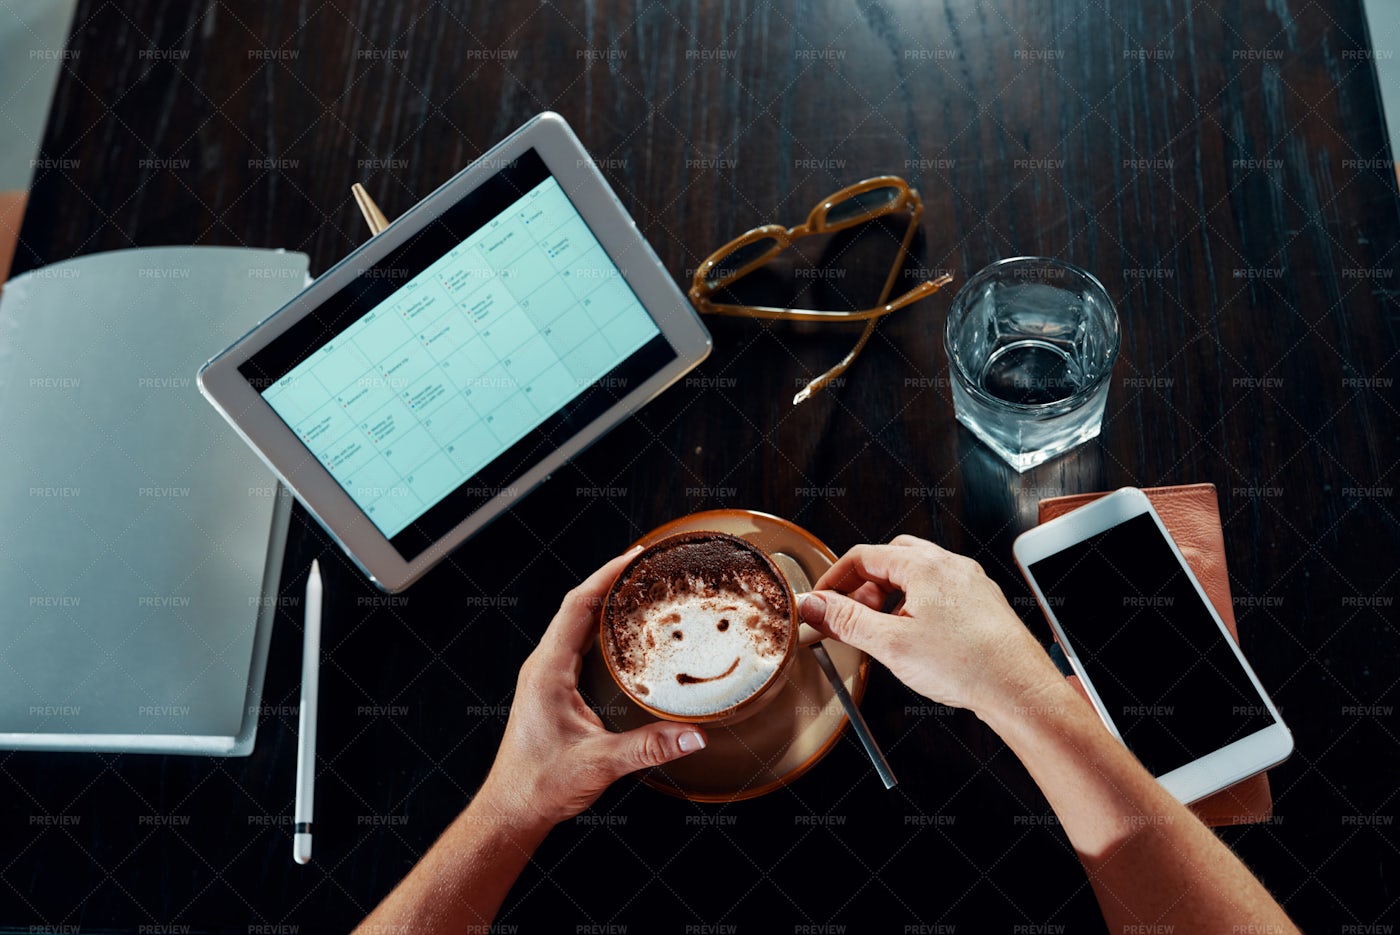 Drinking Cappuccino And Planning...: Stock Photos